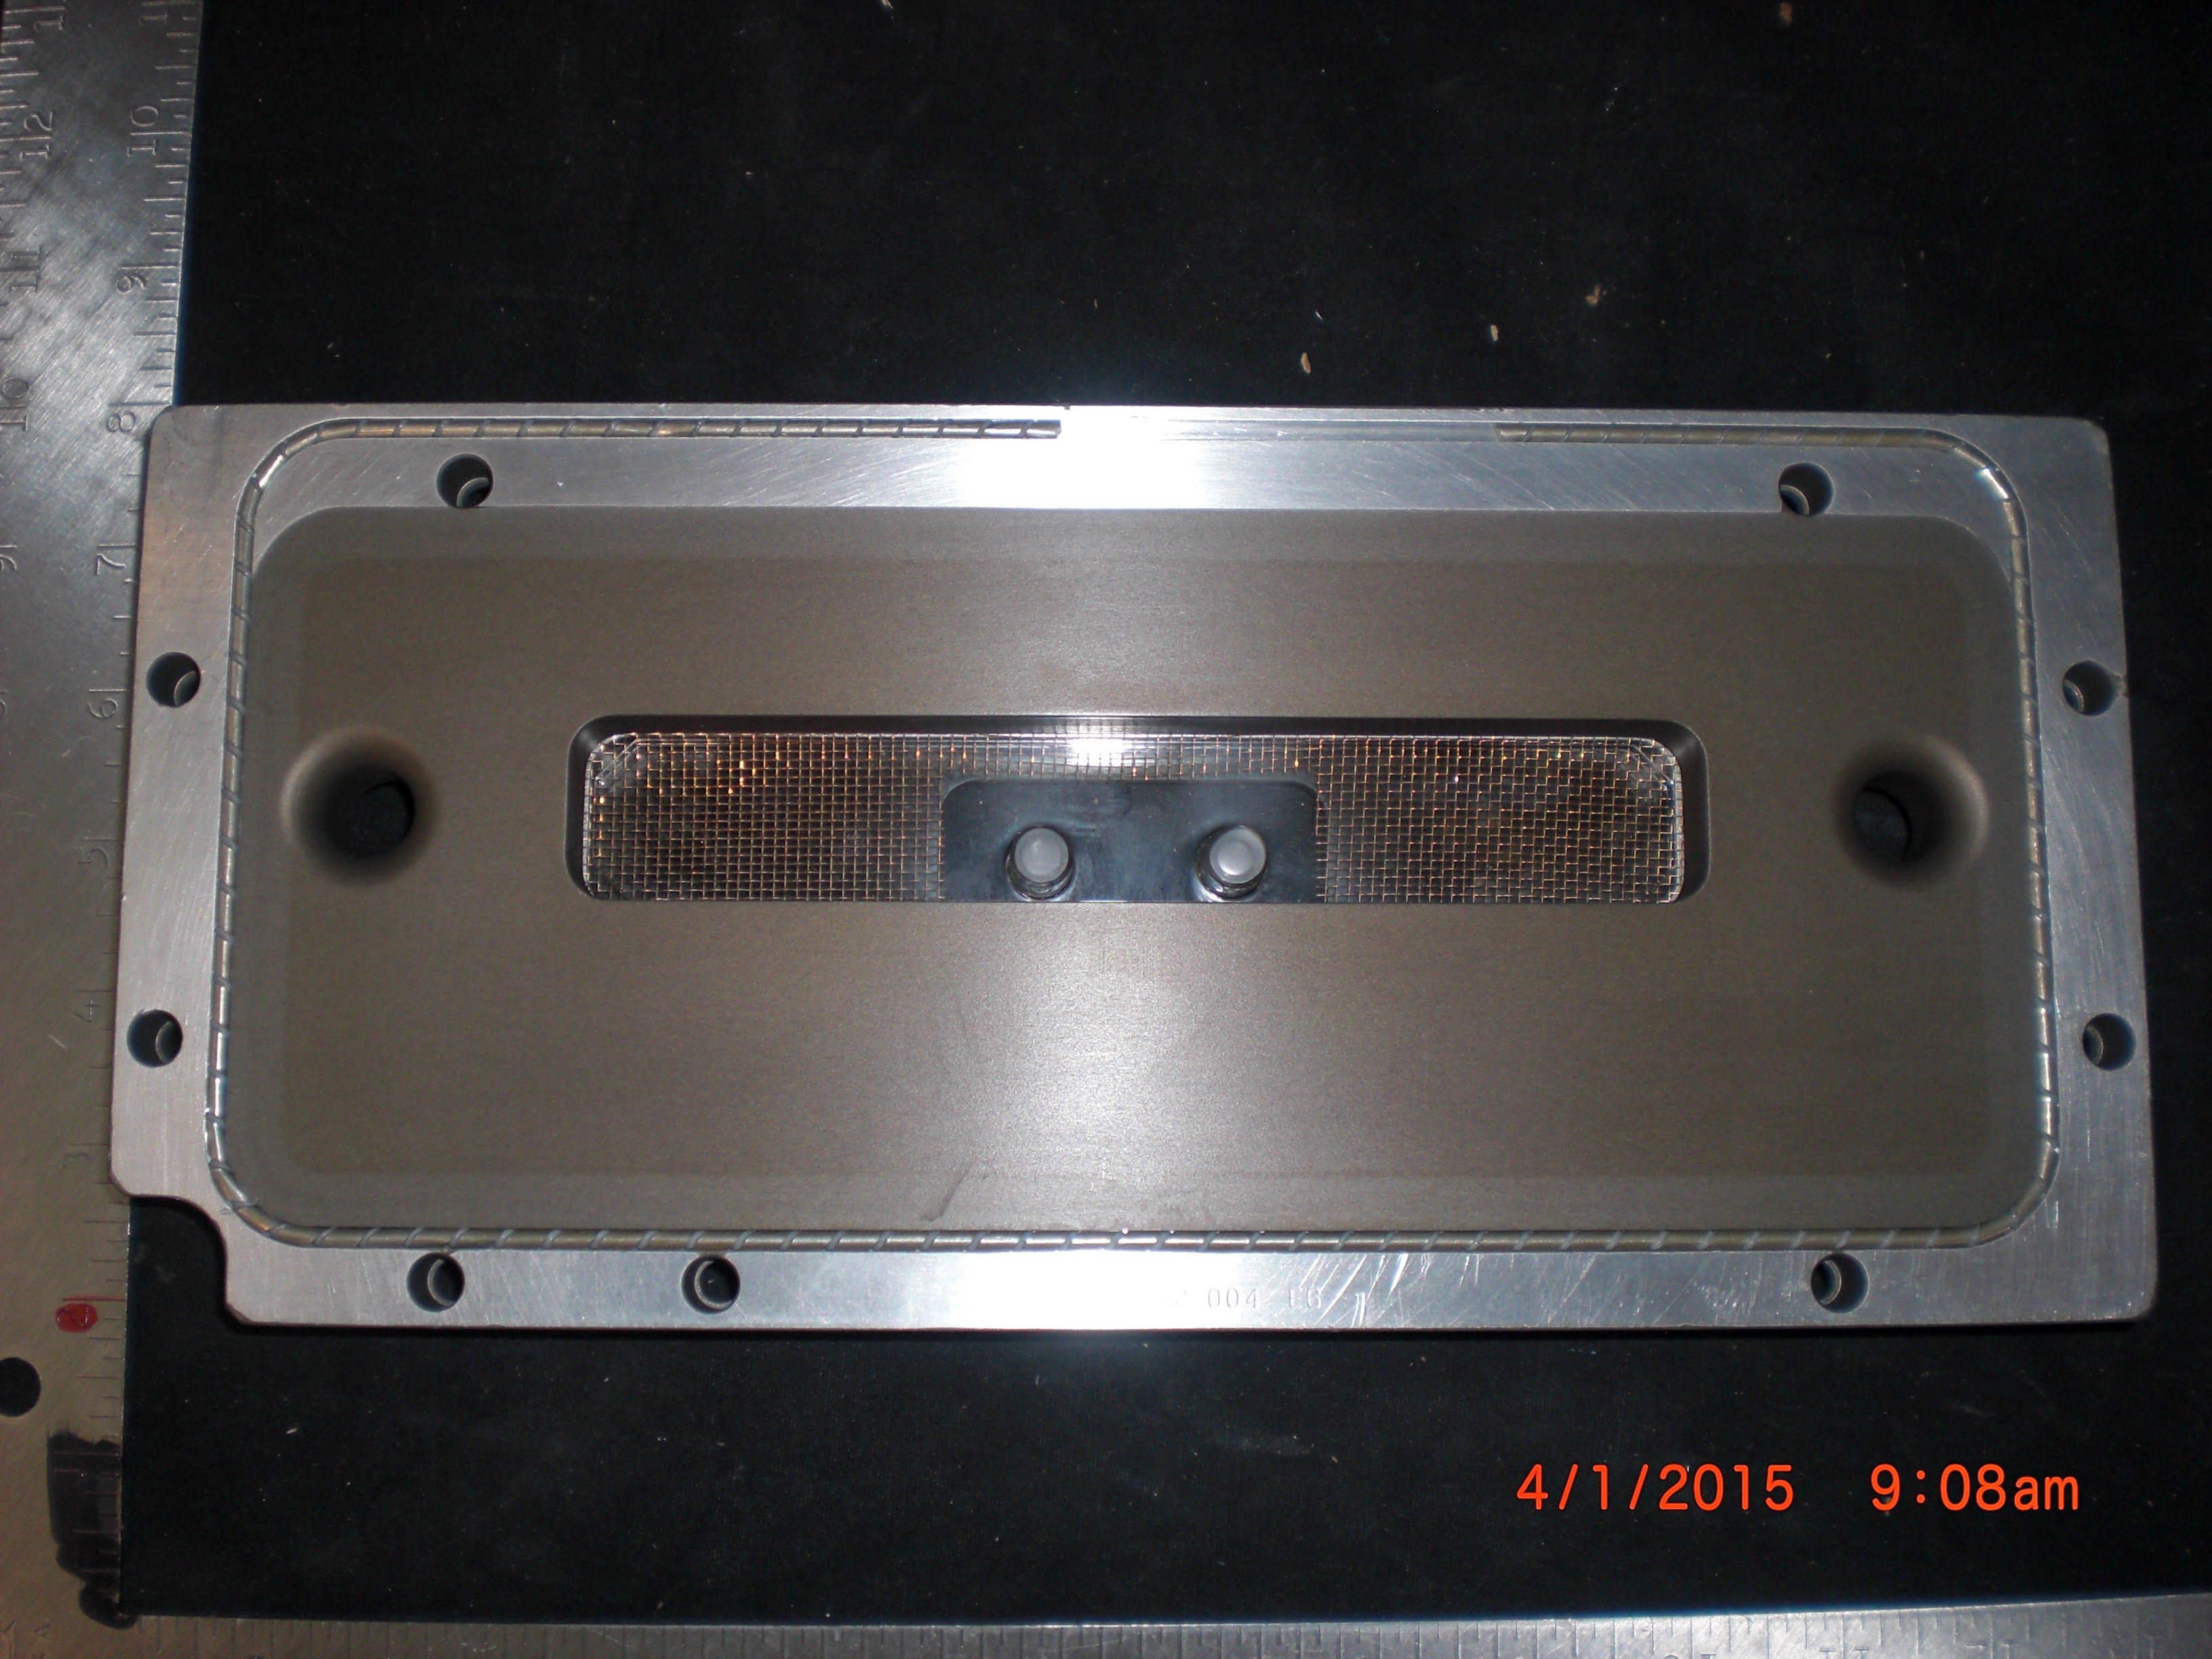 Details about   OEM Part LAM 715-032012-003 Chamber ENDPLATE 9400 Etch 